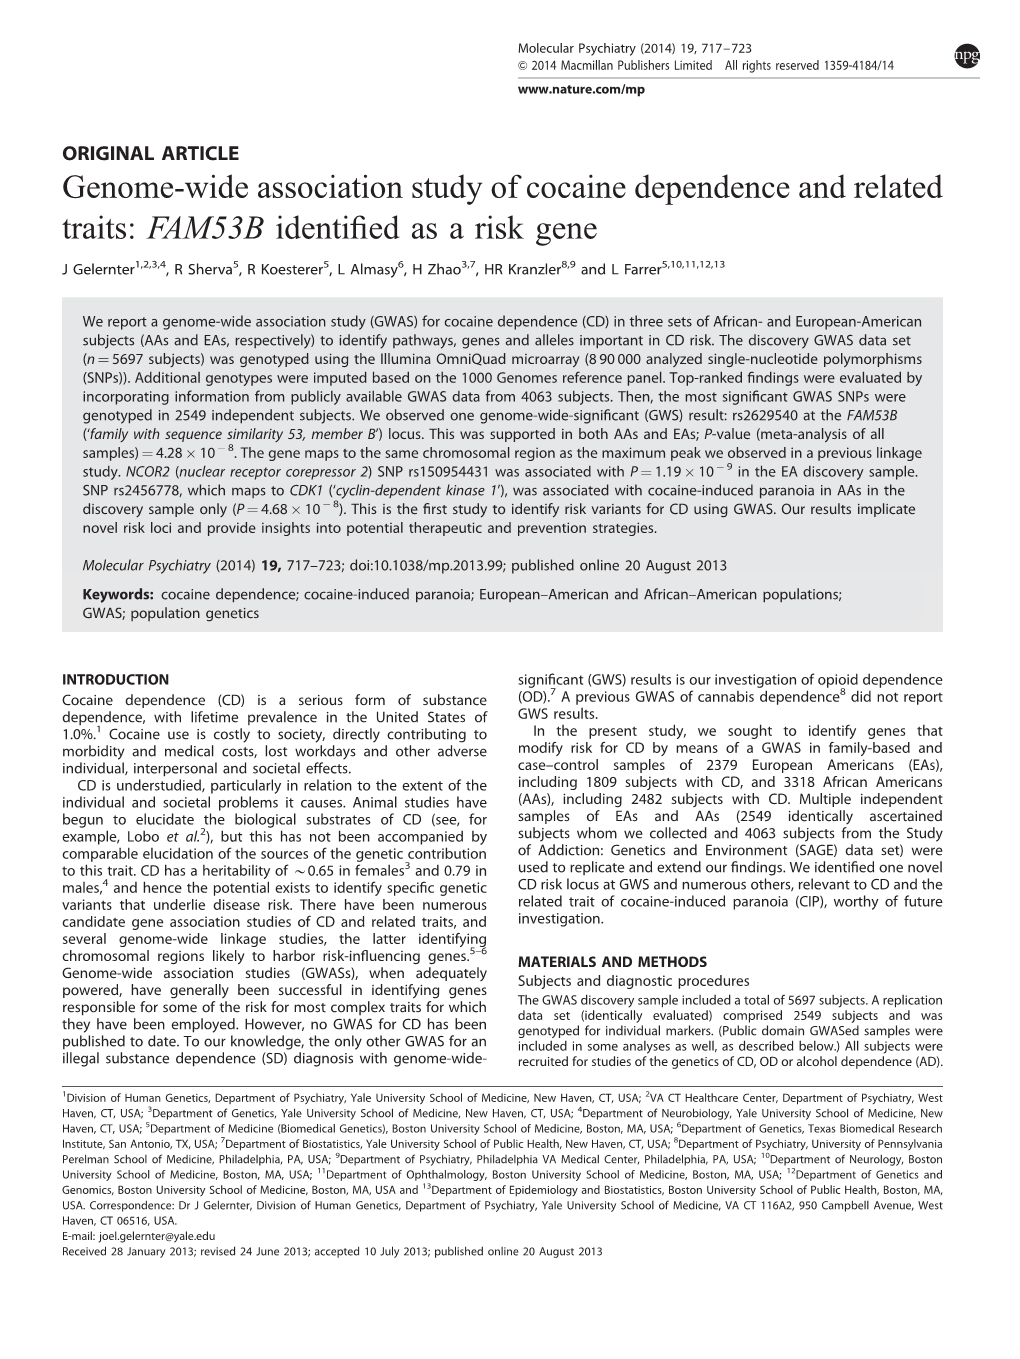 Genome-Wide Association Study of Cocaine Dependence and Related Traits: FAM53B Identiﬁed As a Risk Gene